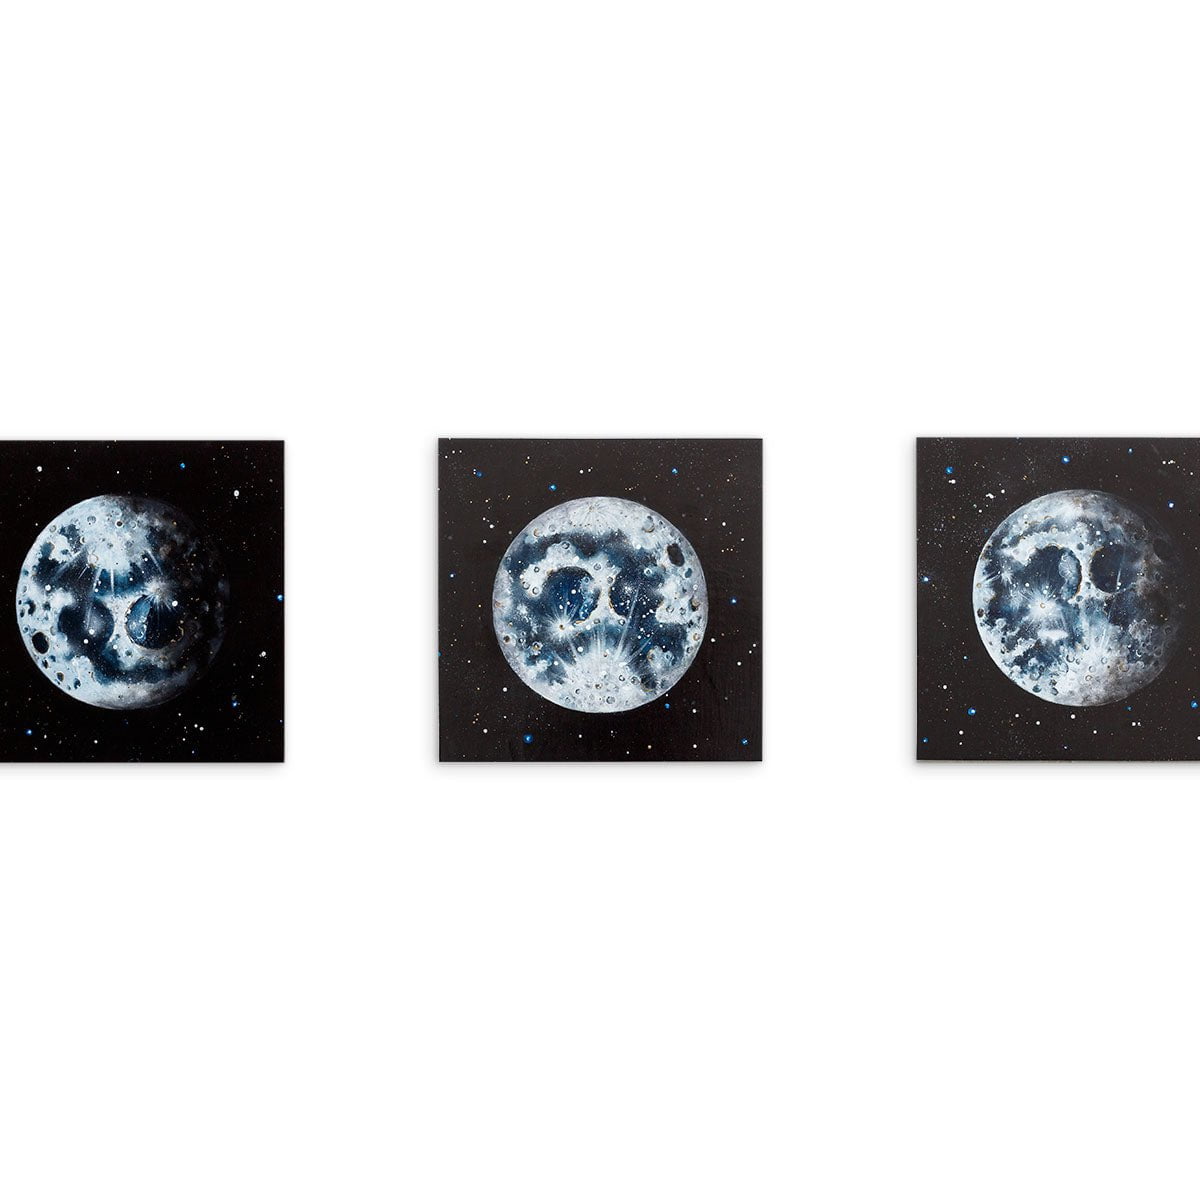 The Glow of the Moon Triptych - Original - SOLD Becky Smith Original